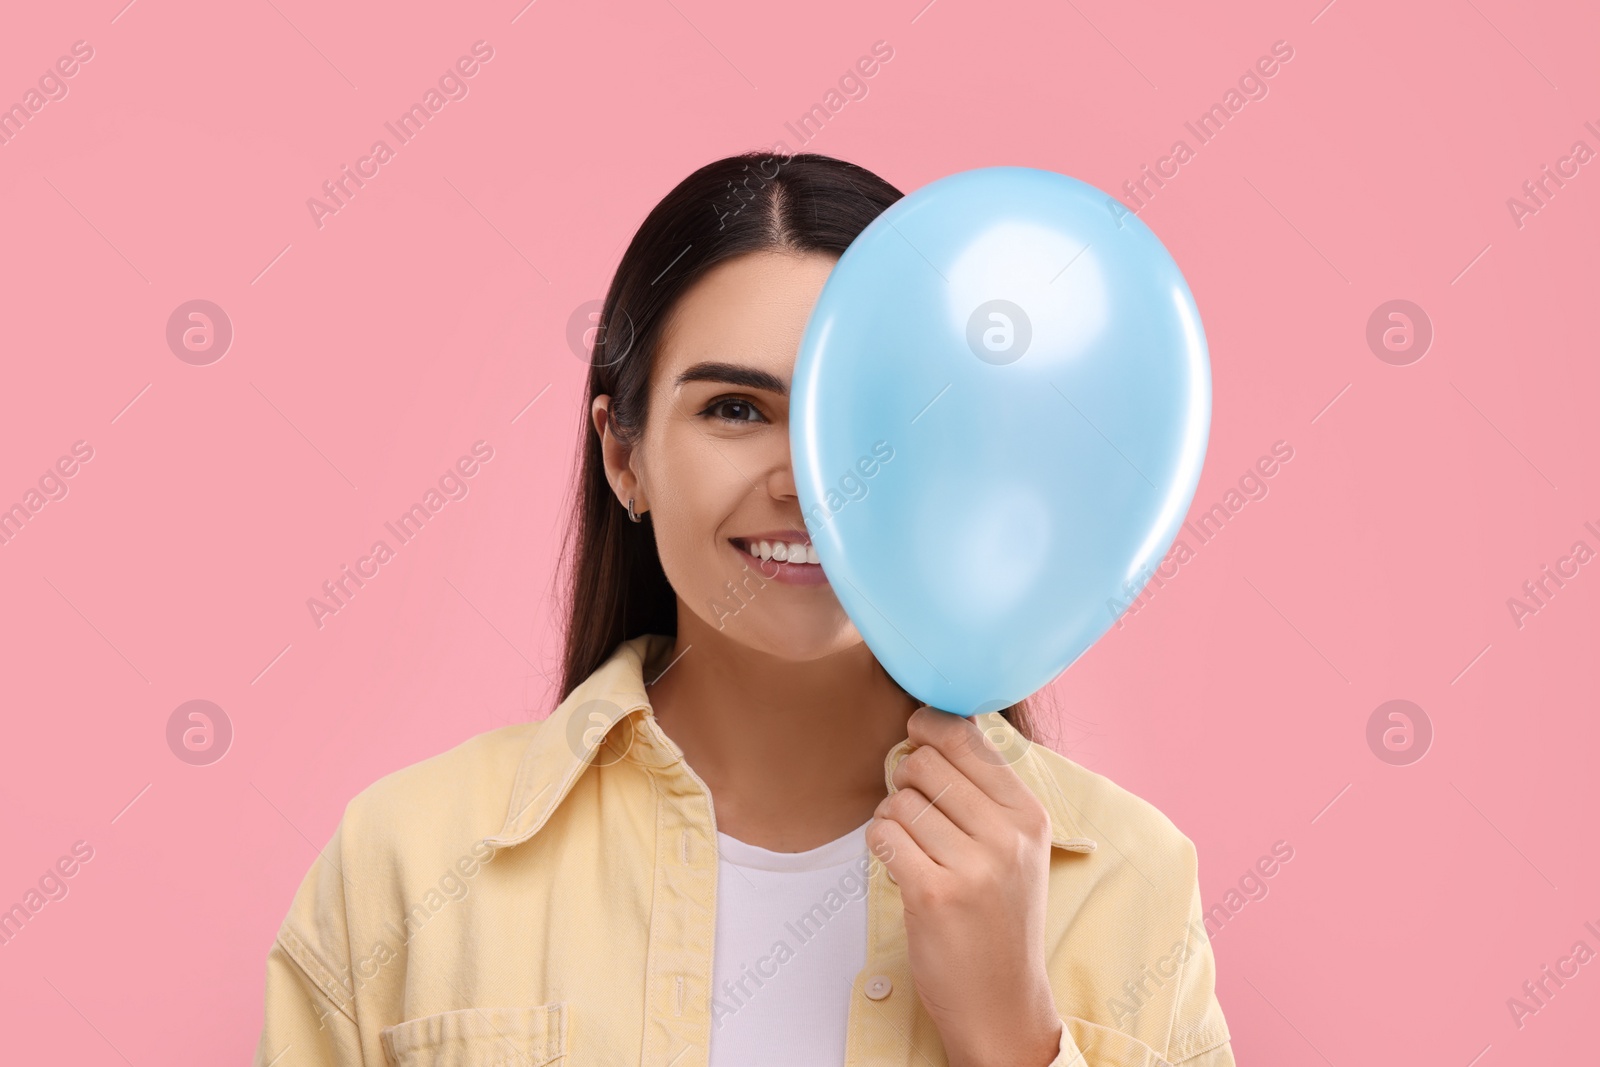 Photo of Woman with light blue balloon on pink background